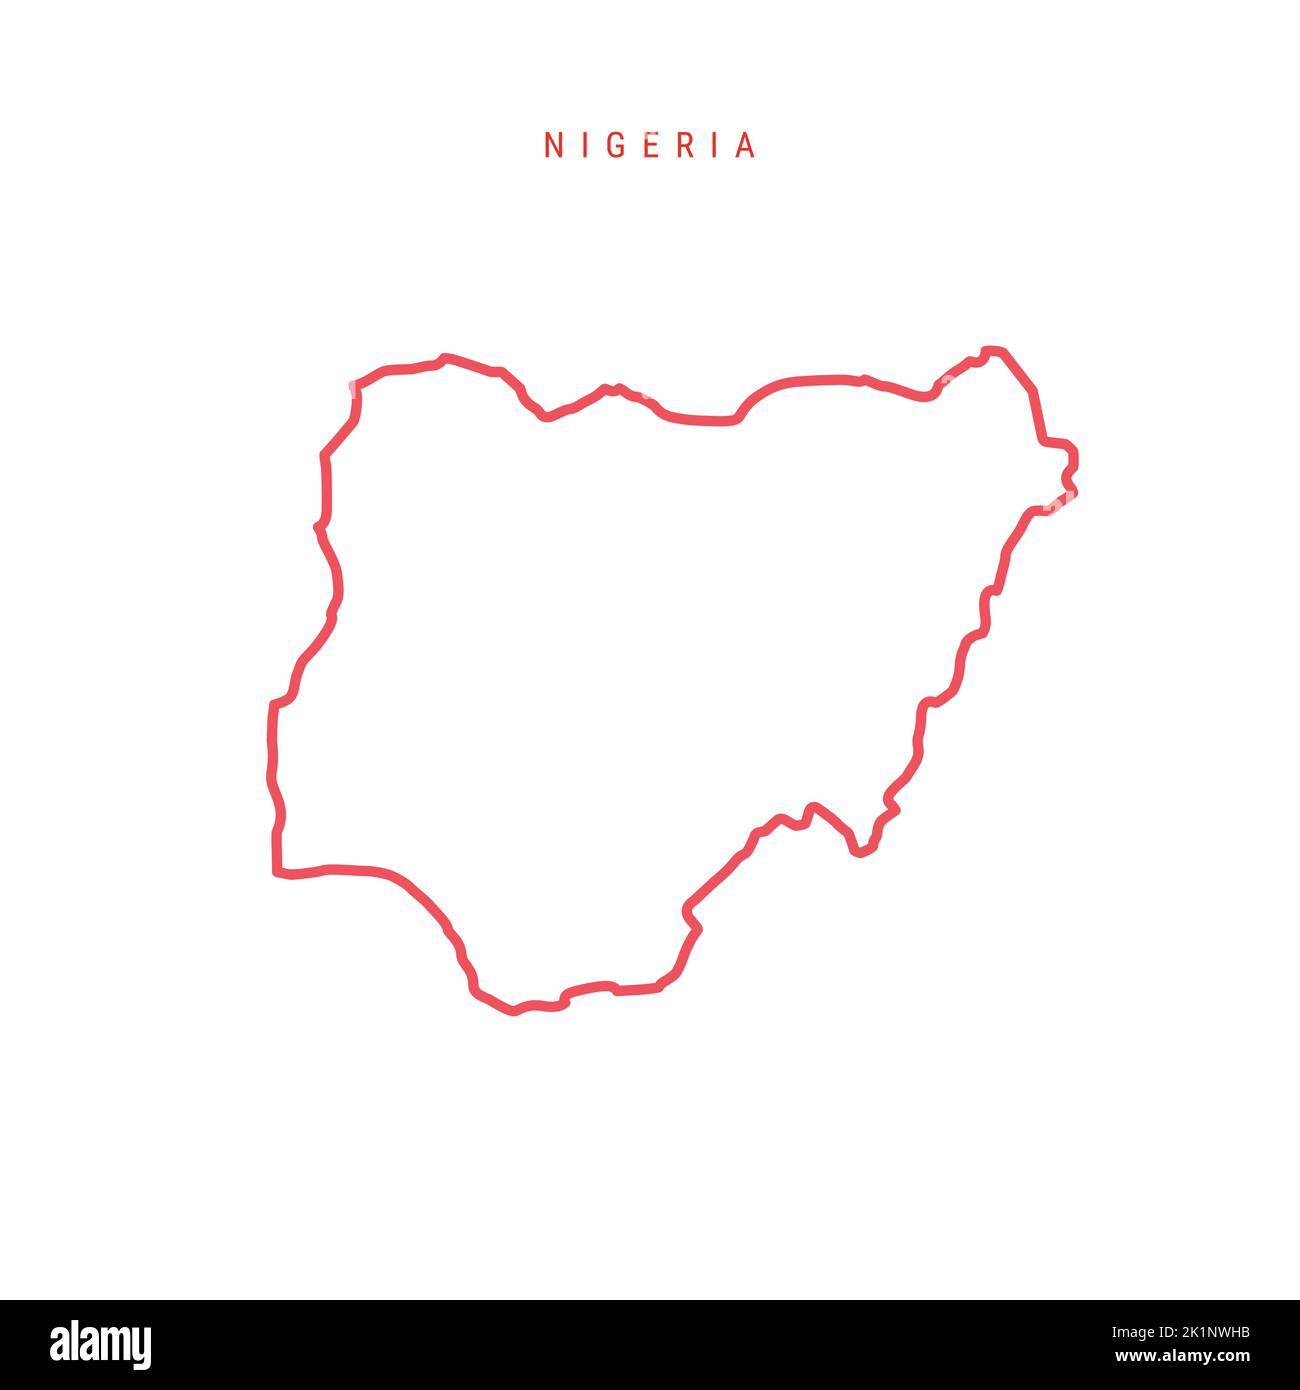 Nigeria editable outline map. Nigerian red border. Country name. Adjust line weight. Change to any color. Vector illustration. Stock Vector